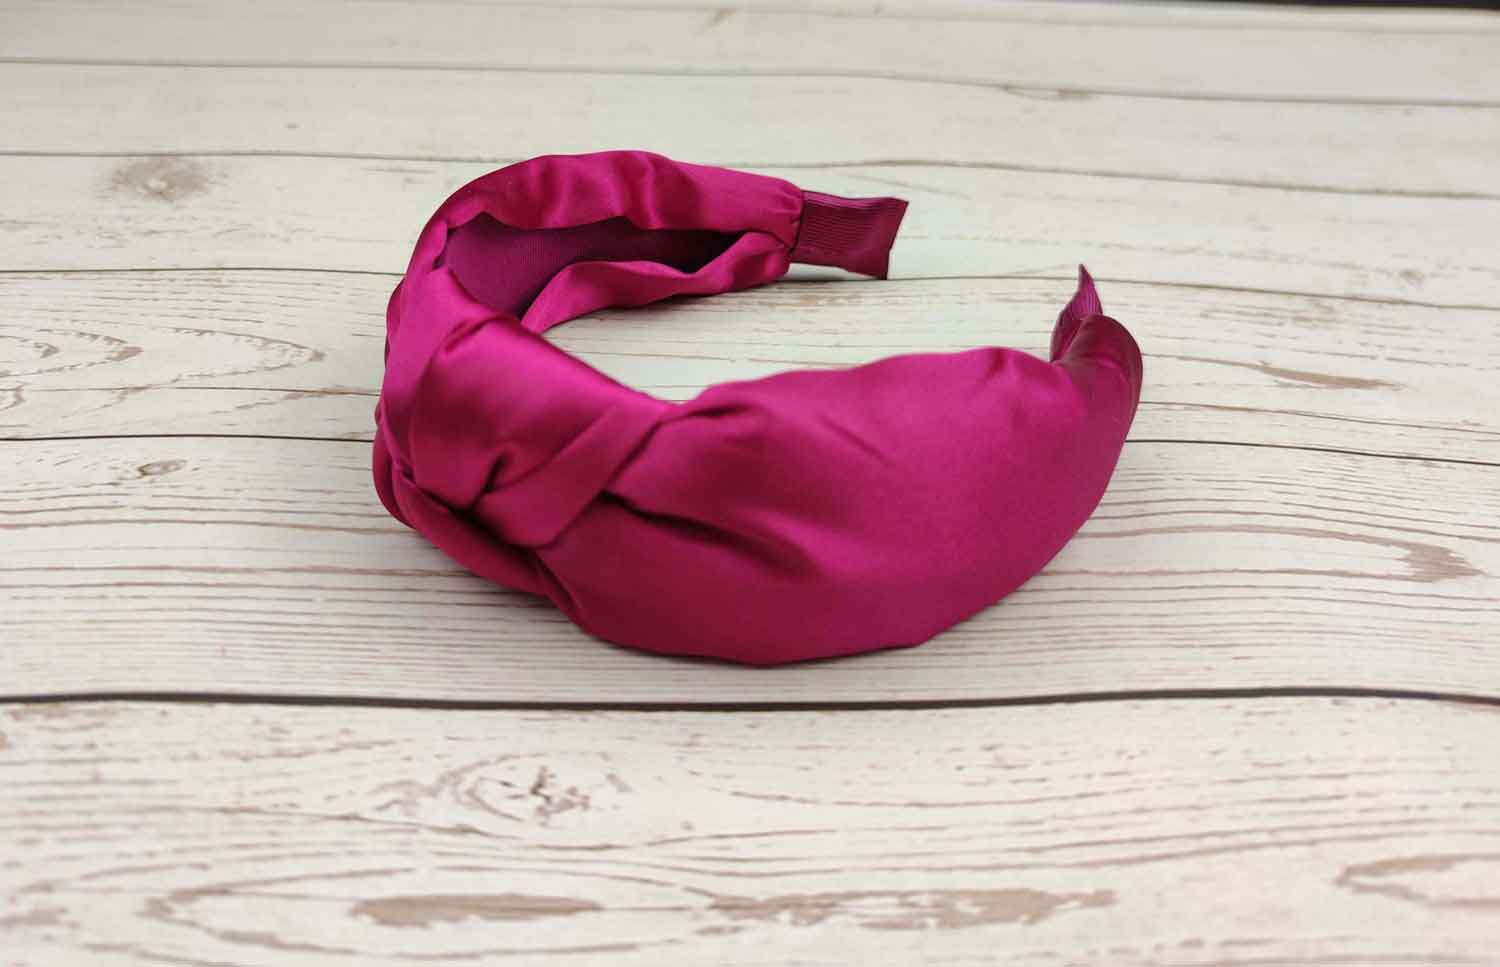 Fuschia Pink Color Satin Headband, Knotted Headband, Women Headband, Headband for Girl, Cyclamen Pink Turban Hairband with Padded